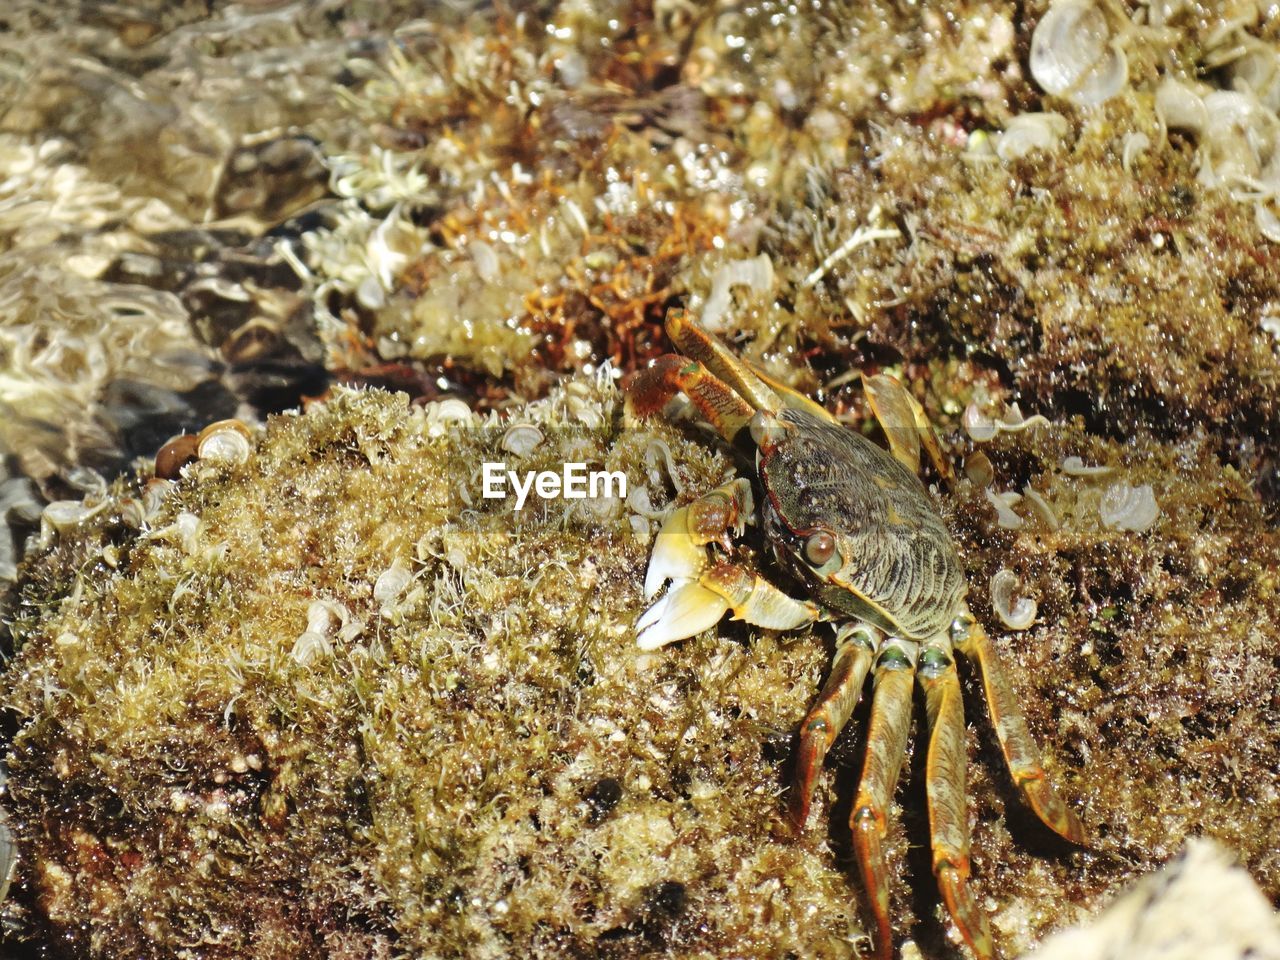 CLOSE-UP OF CRAB ON SHORE